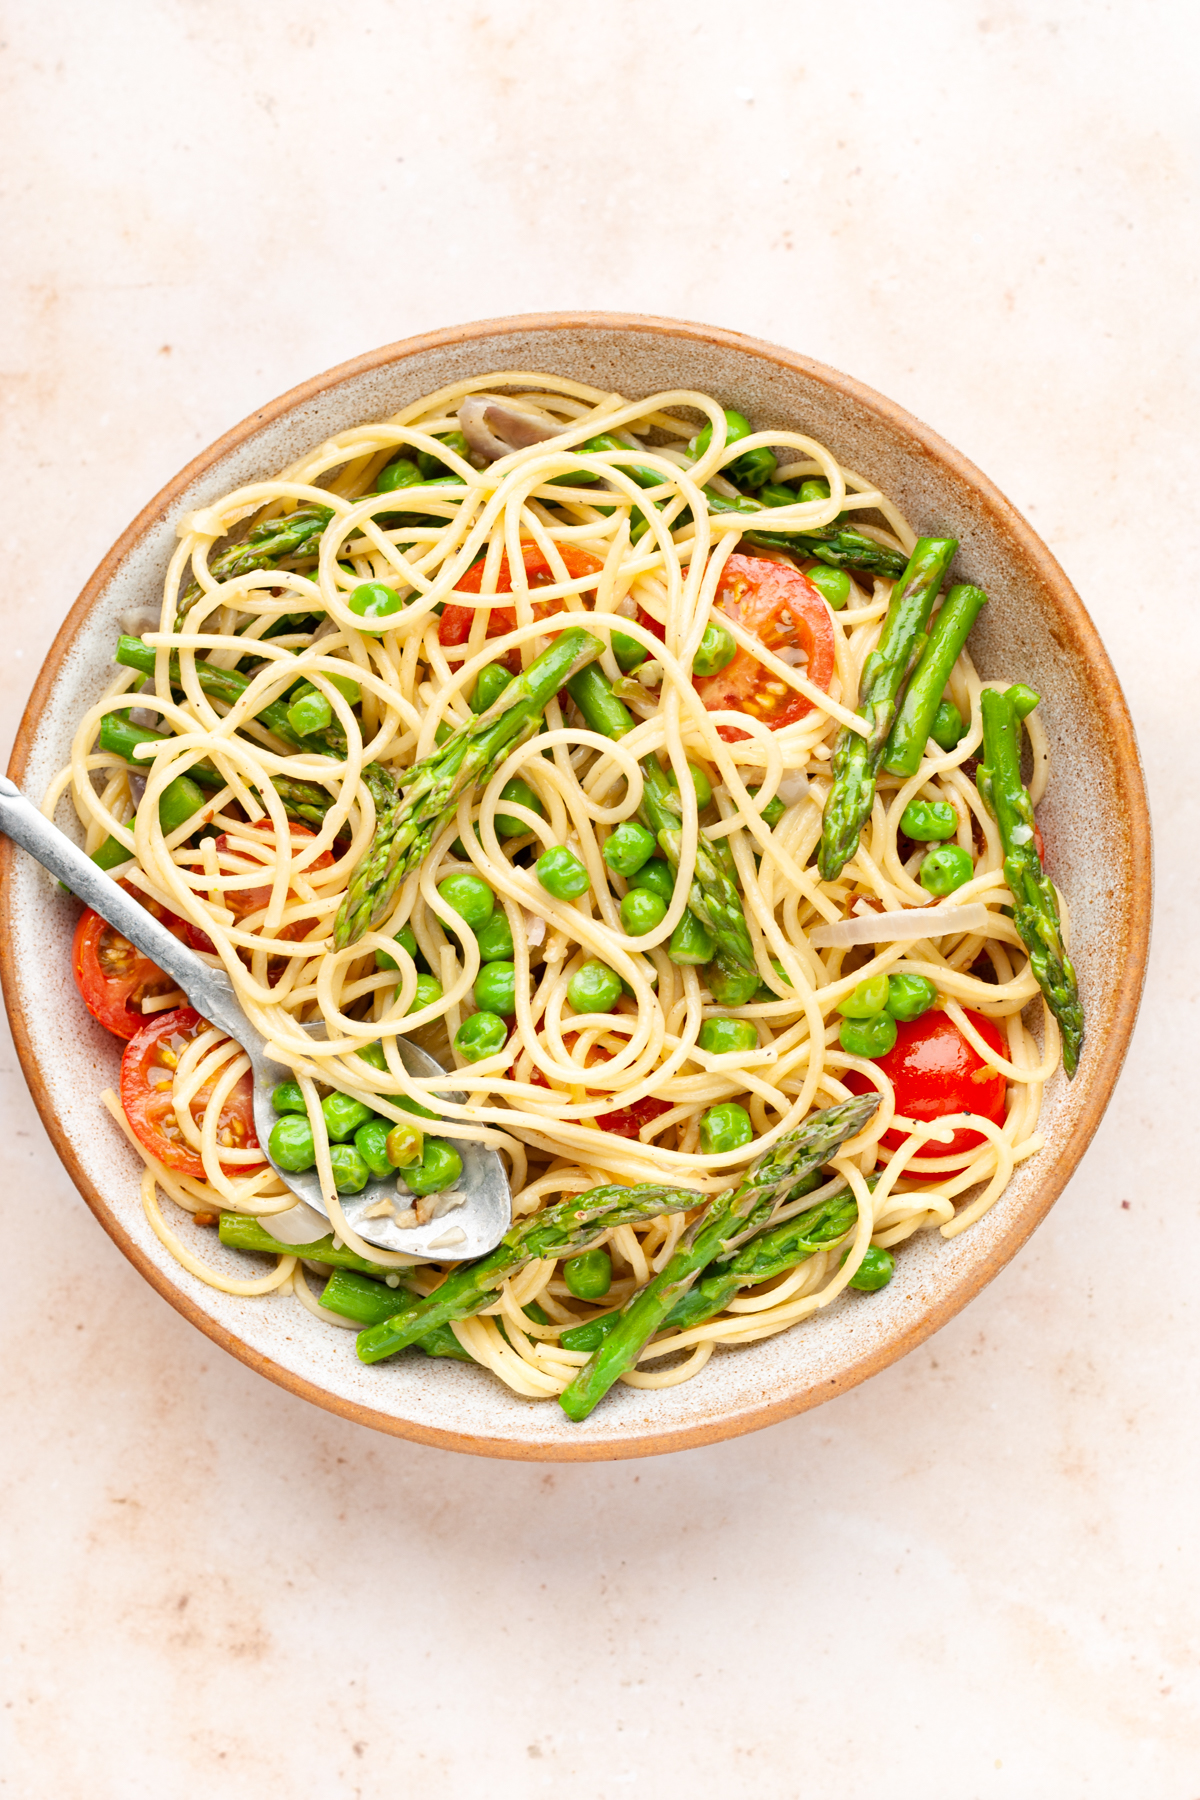 pasta primavera with asparagus, peas, and cherry tomatoes in a bowl with spoon.